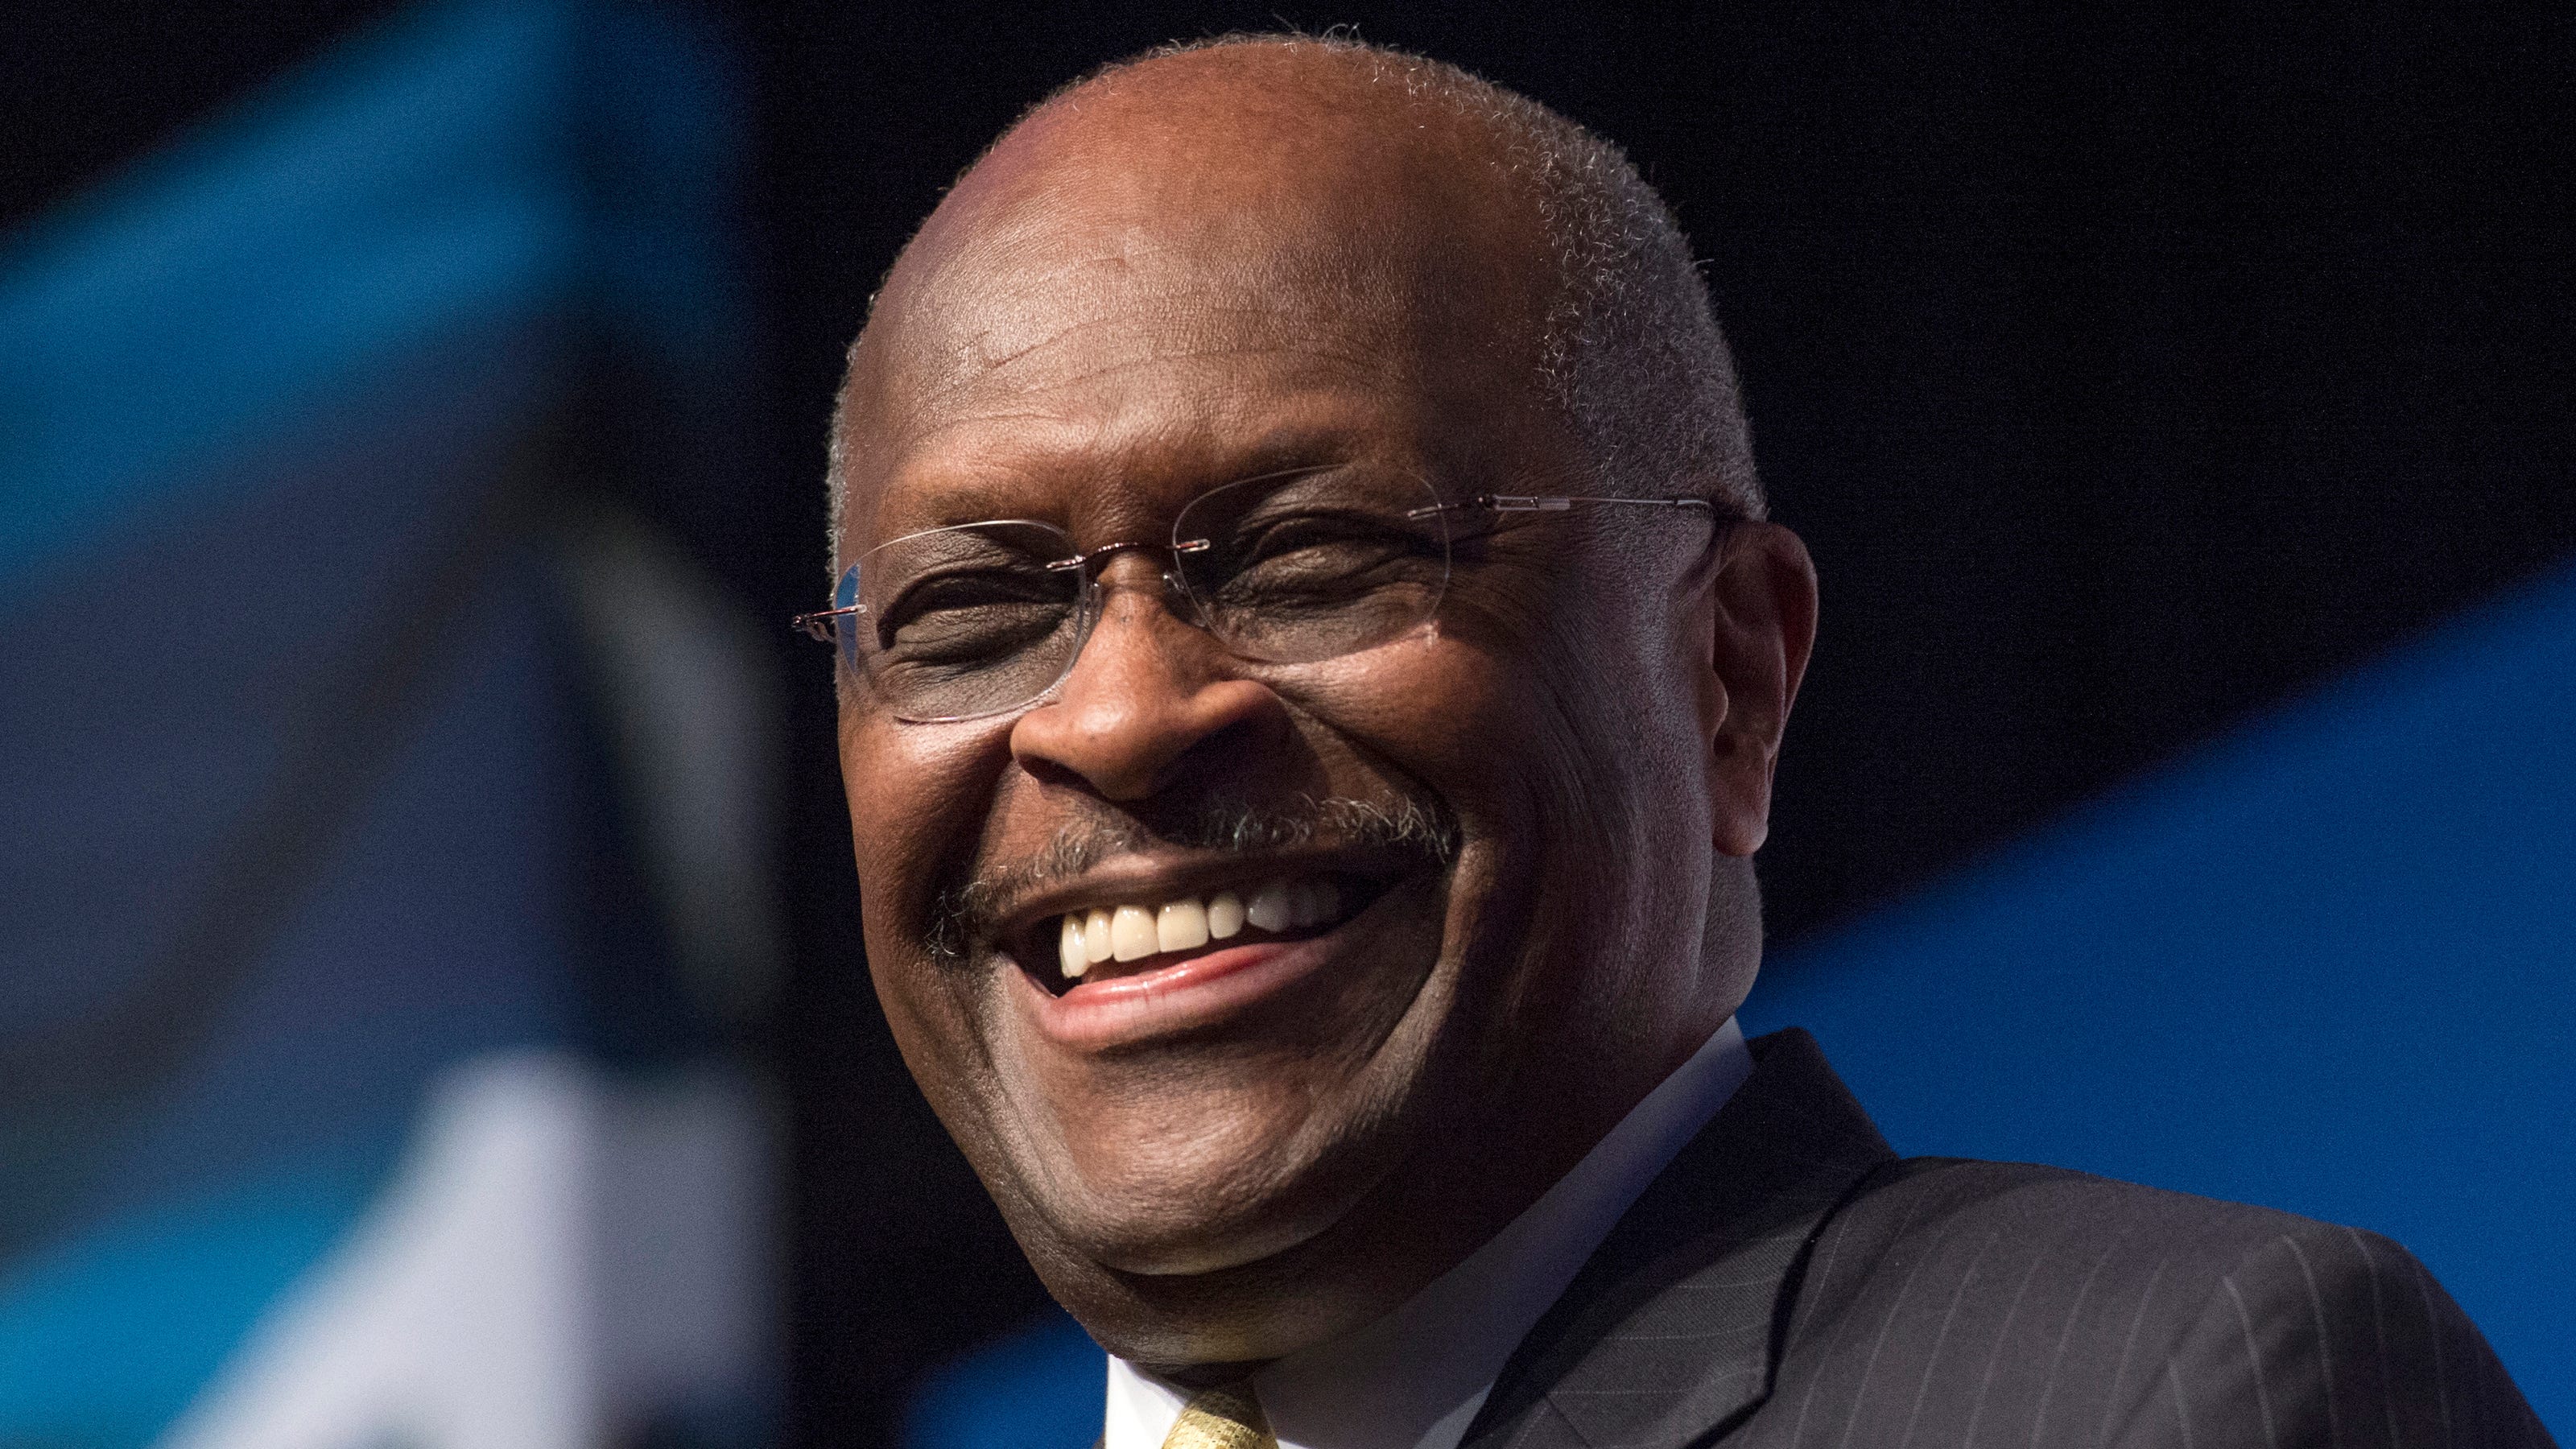 Herman Cain dies after battle with COVID19